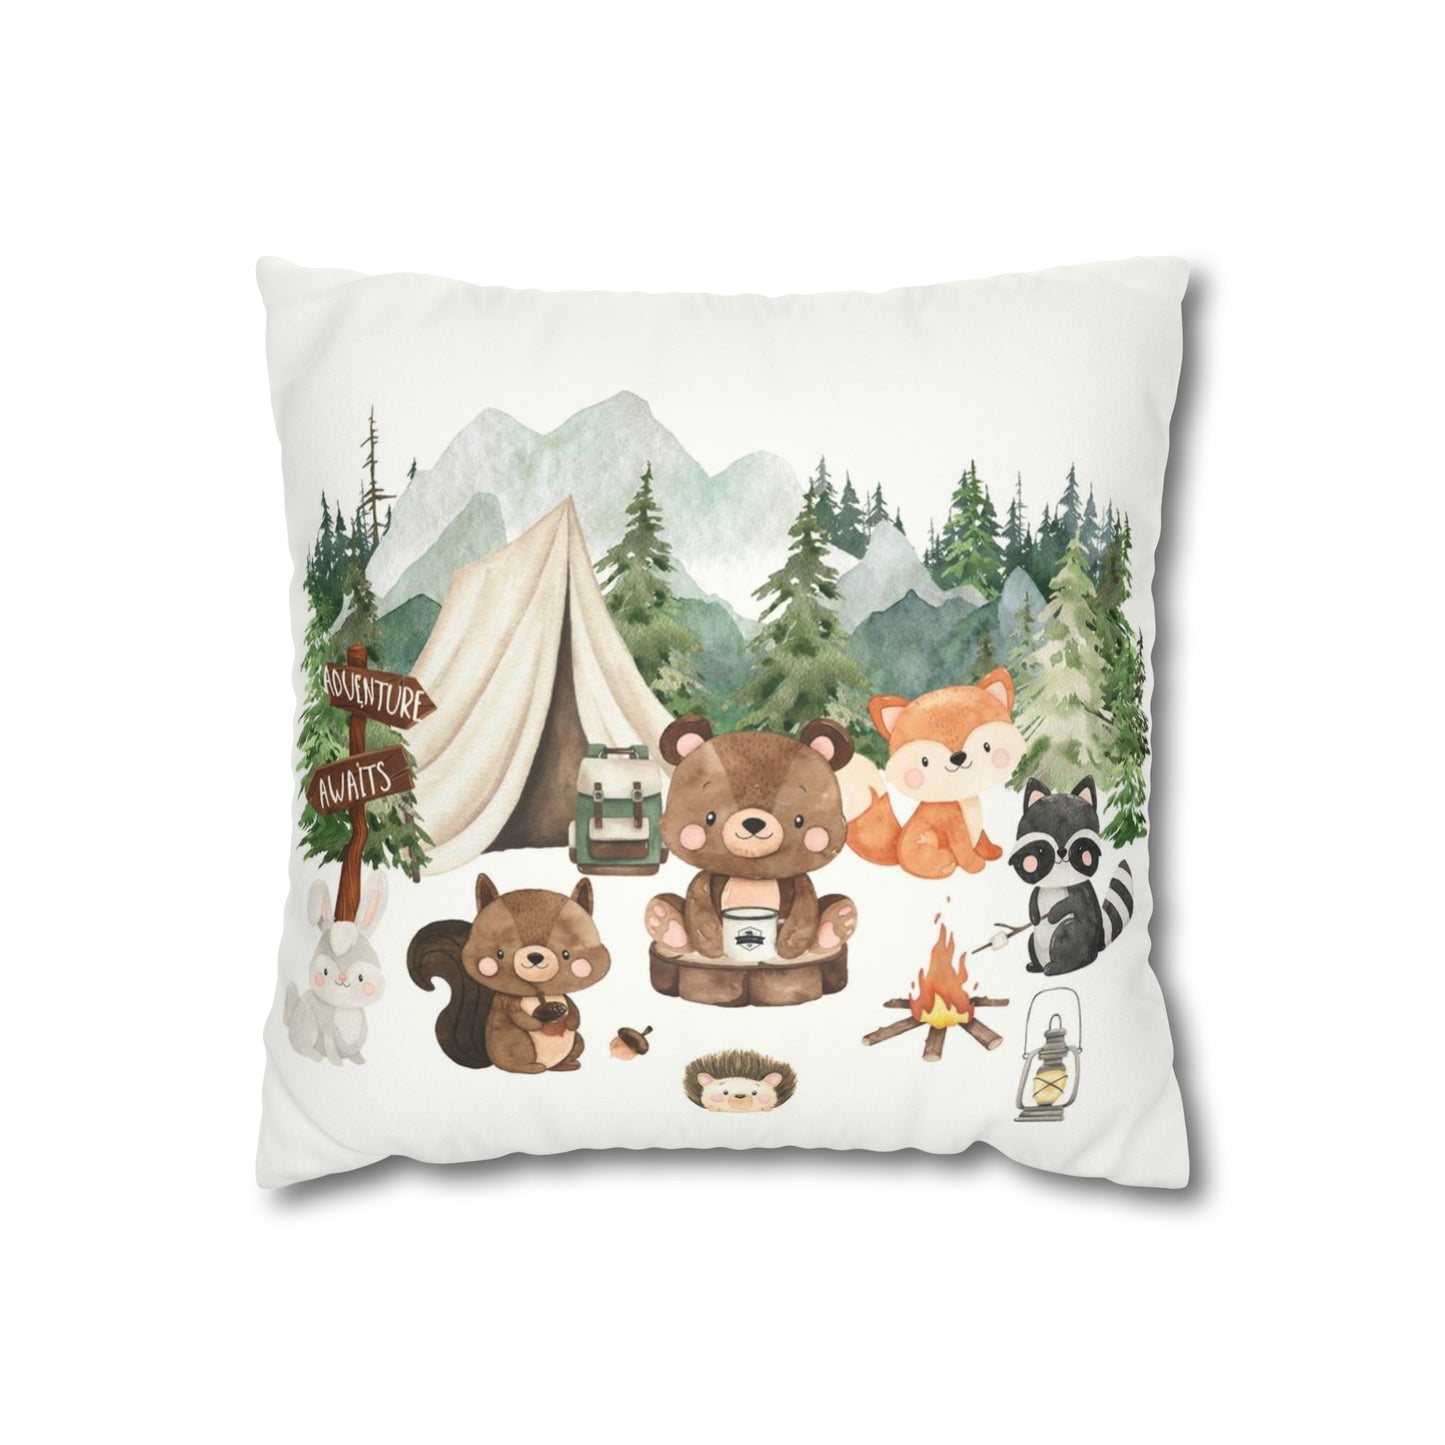 Woodland animals Faux Suede Square Pillow Case, Forest pillow cover - Camping critters